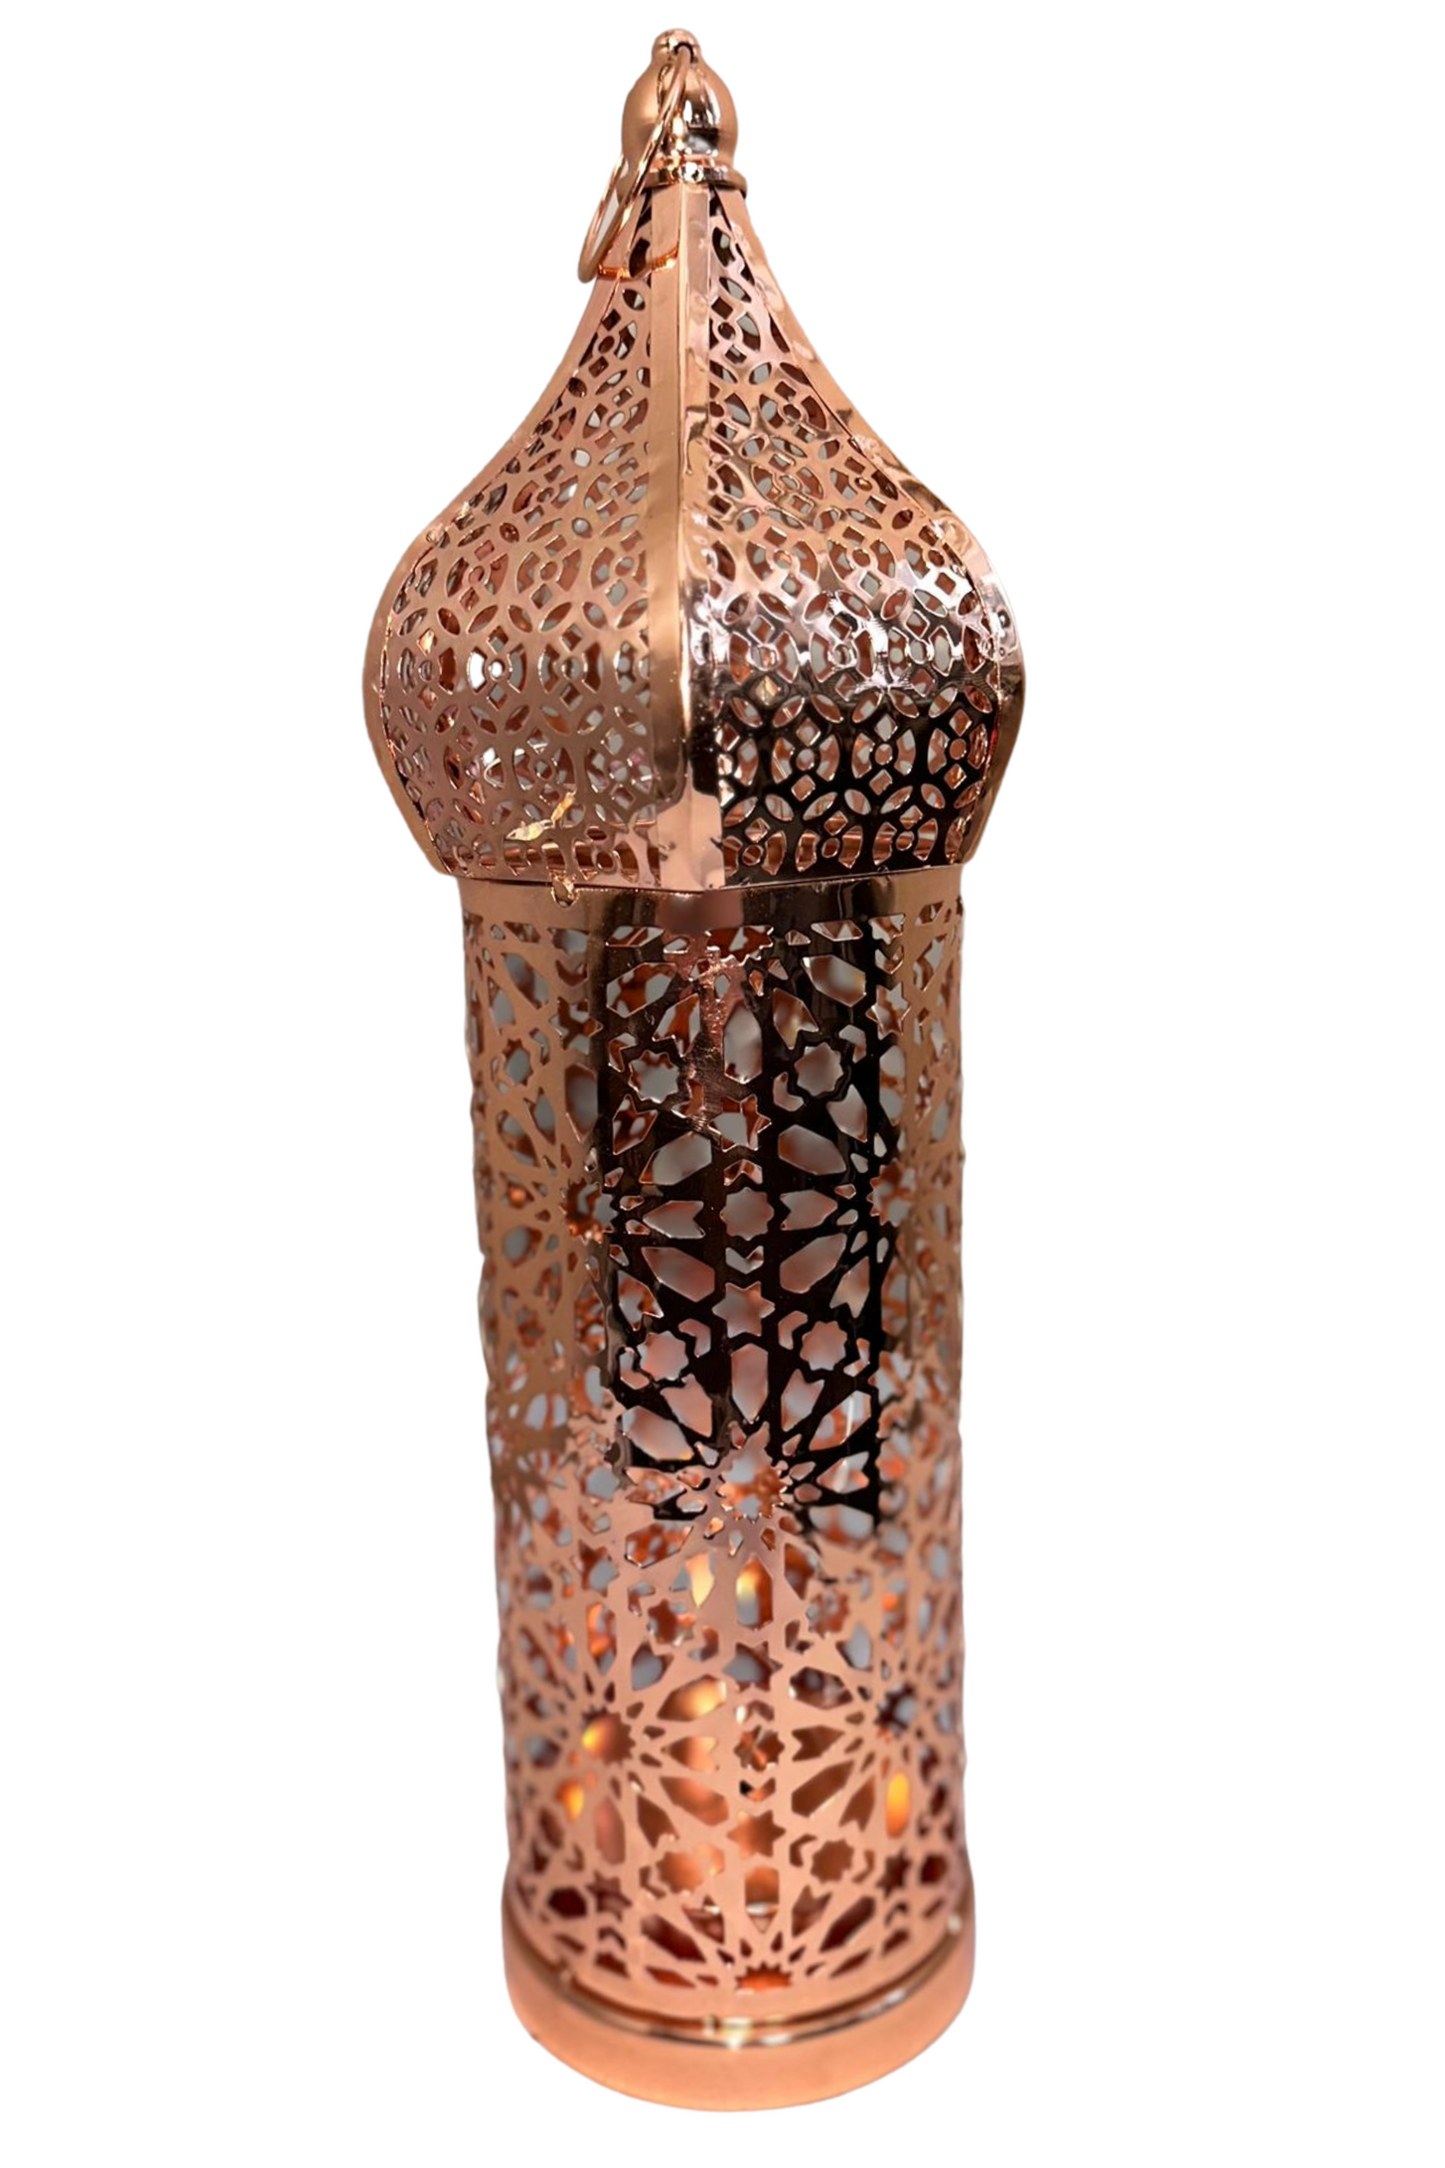 Large Mosaic Lantern - Rose Gold with LED Light and Battery Operated